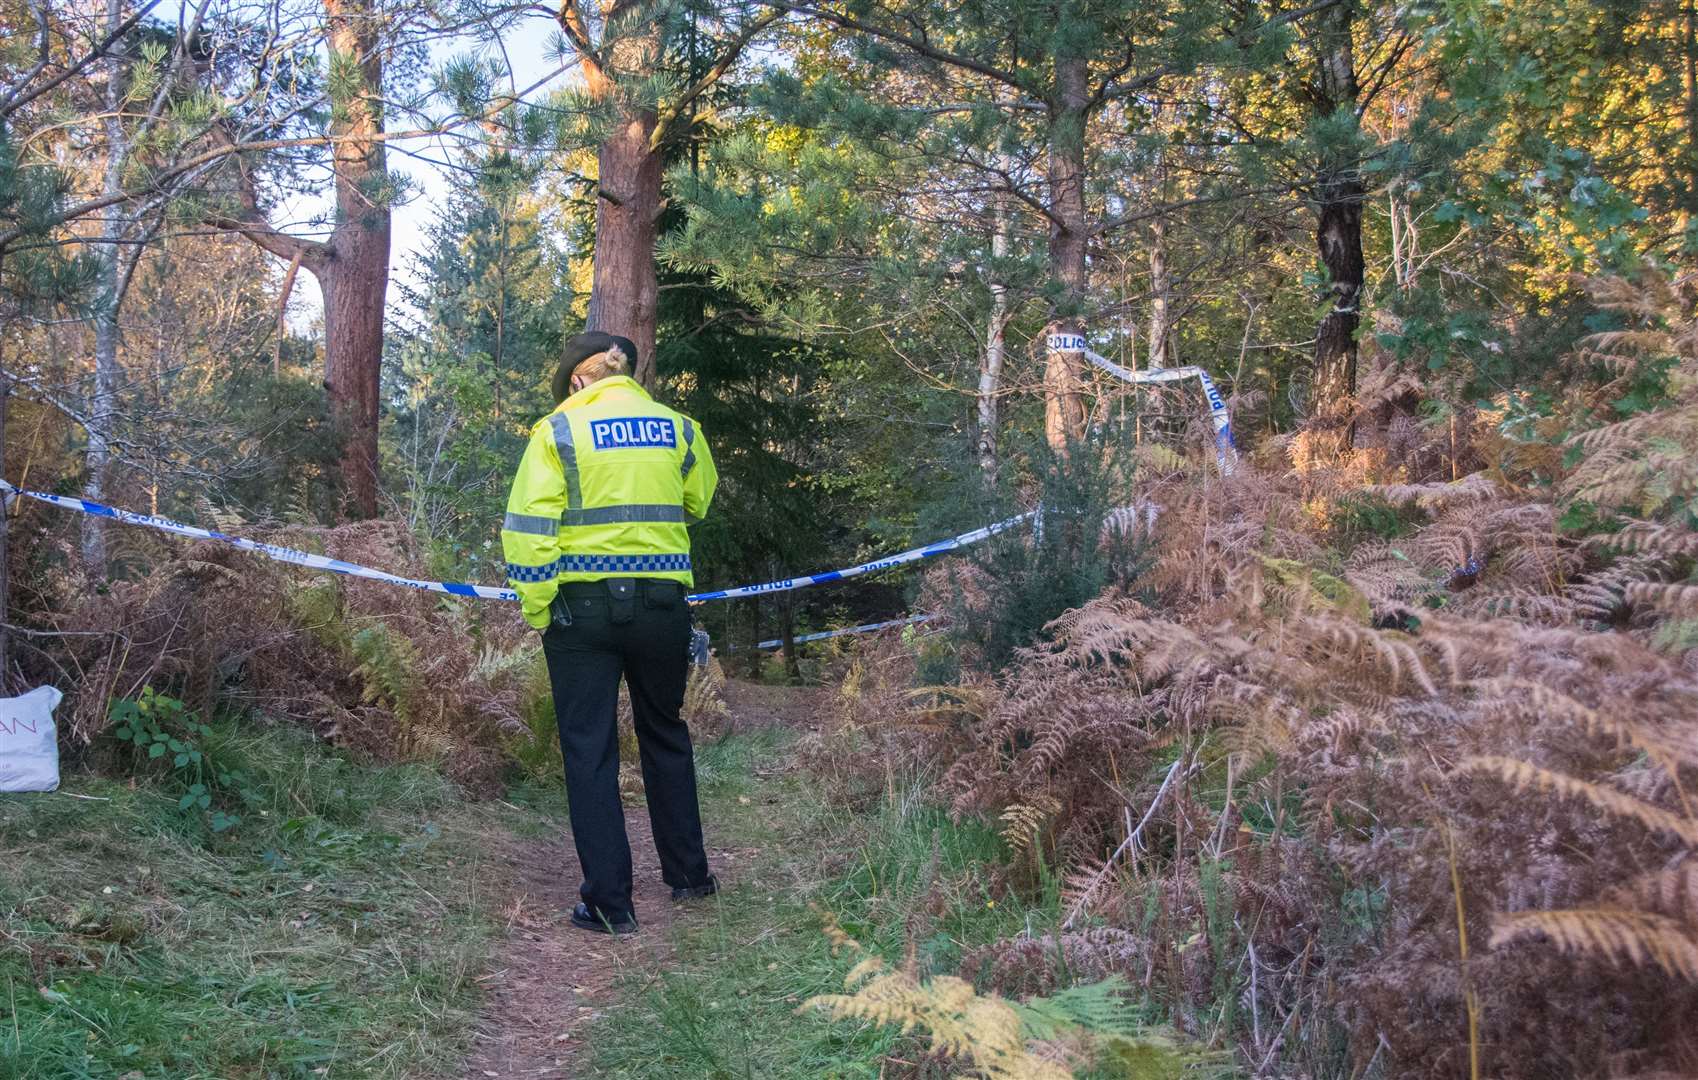 An officer close to the scene at Birkenhill Woods, Elgin.